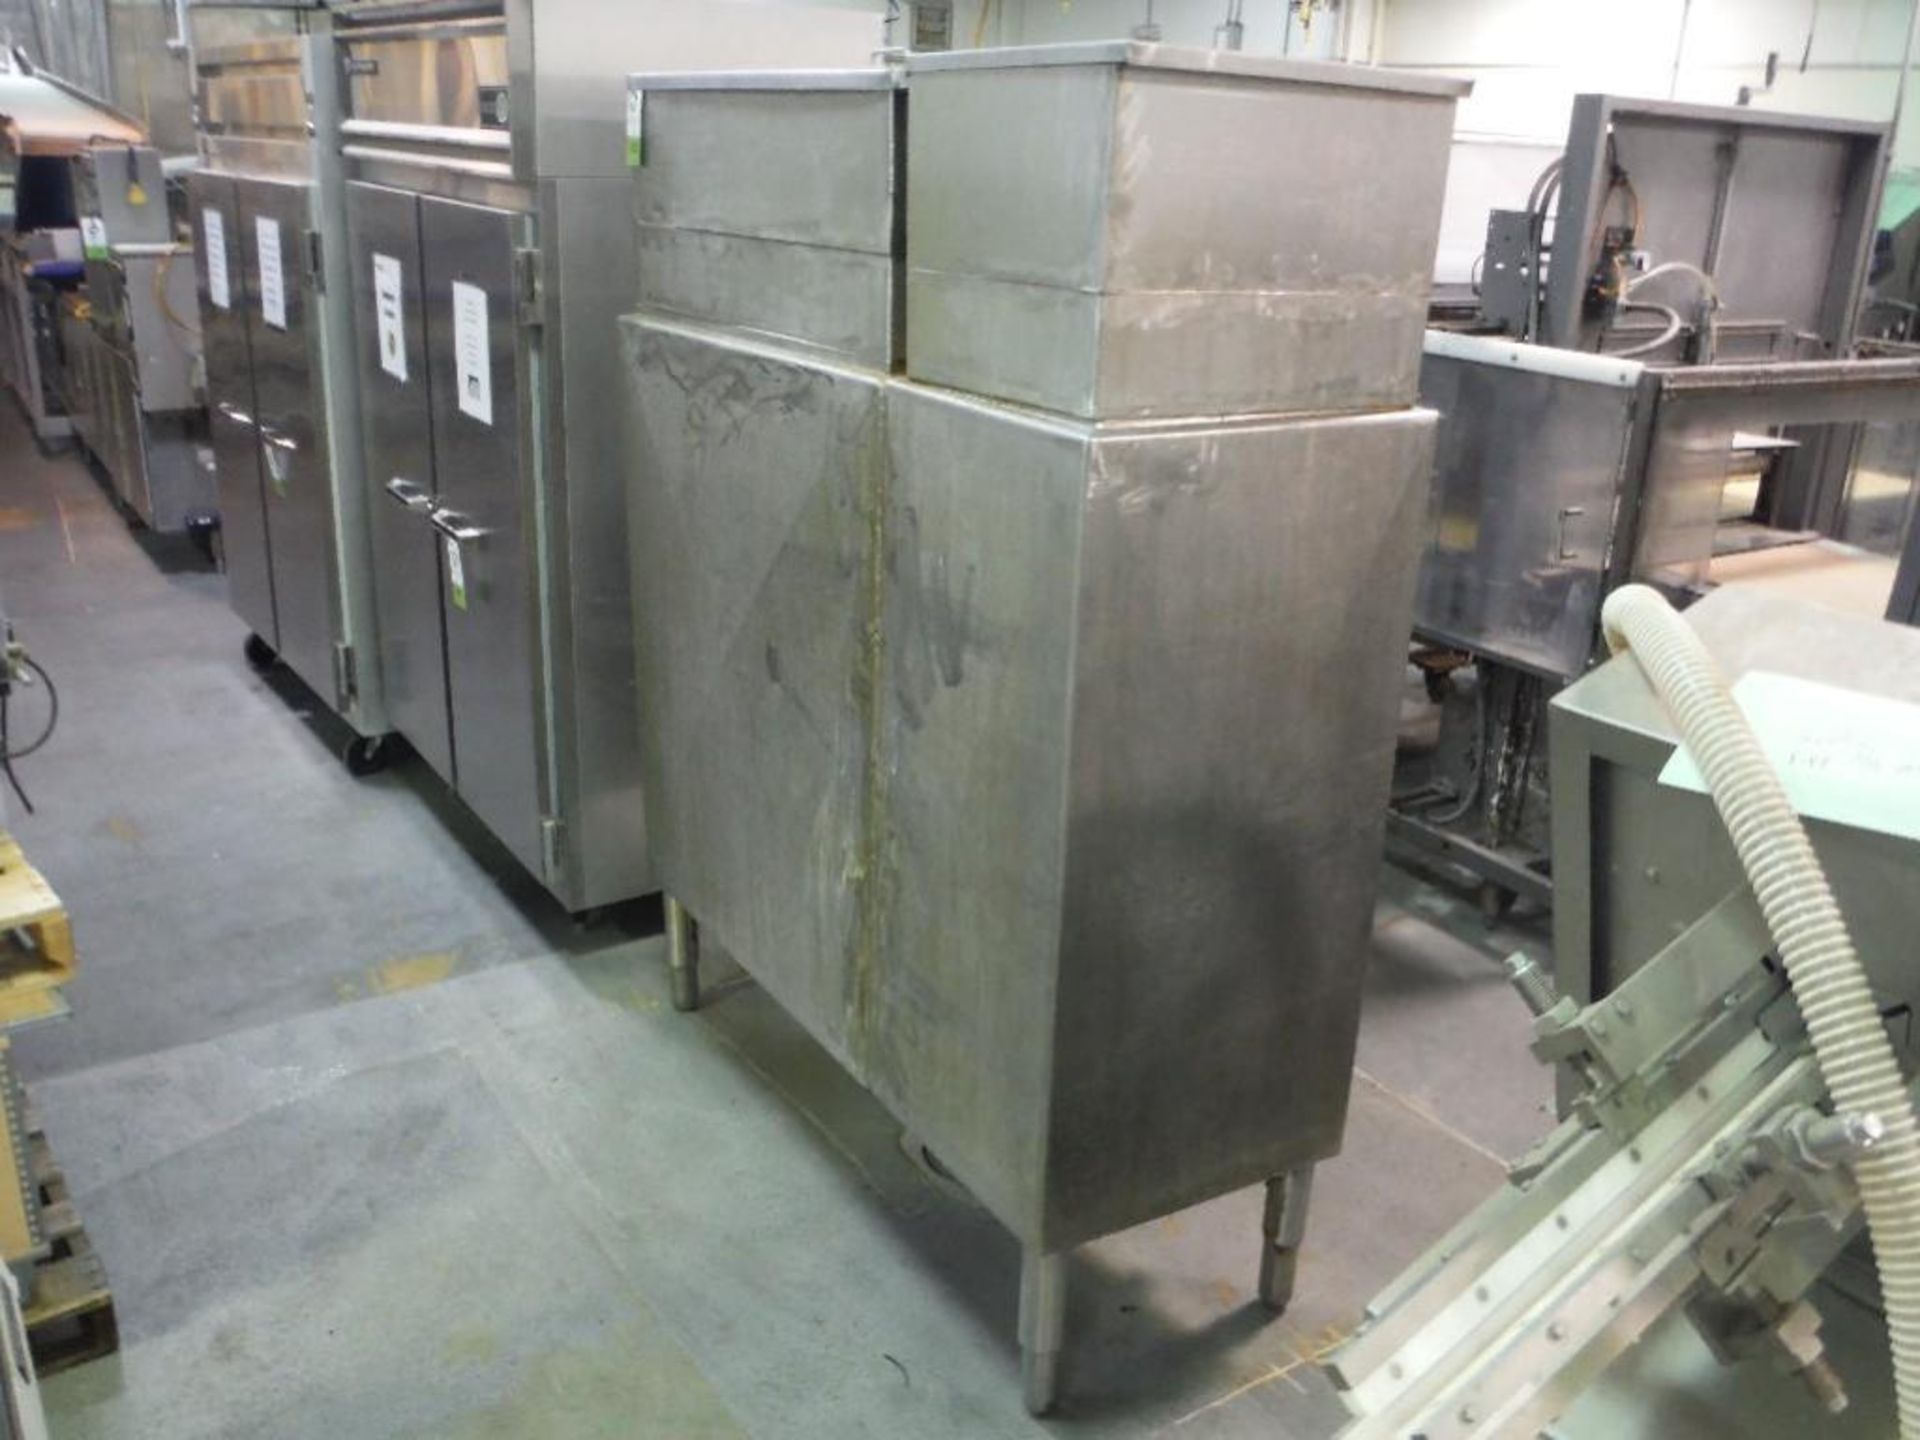 SS 2 compartment holding tank, 60 in. long x 24 in. wide x 48 in. tall, **(Located in: Marshall, MN)